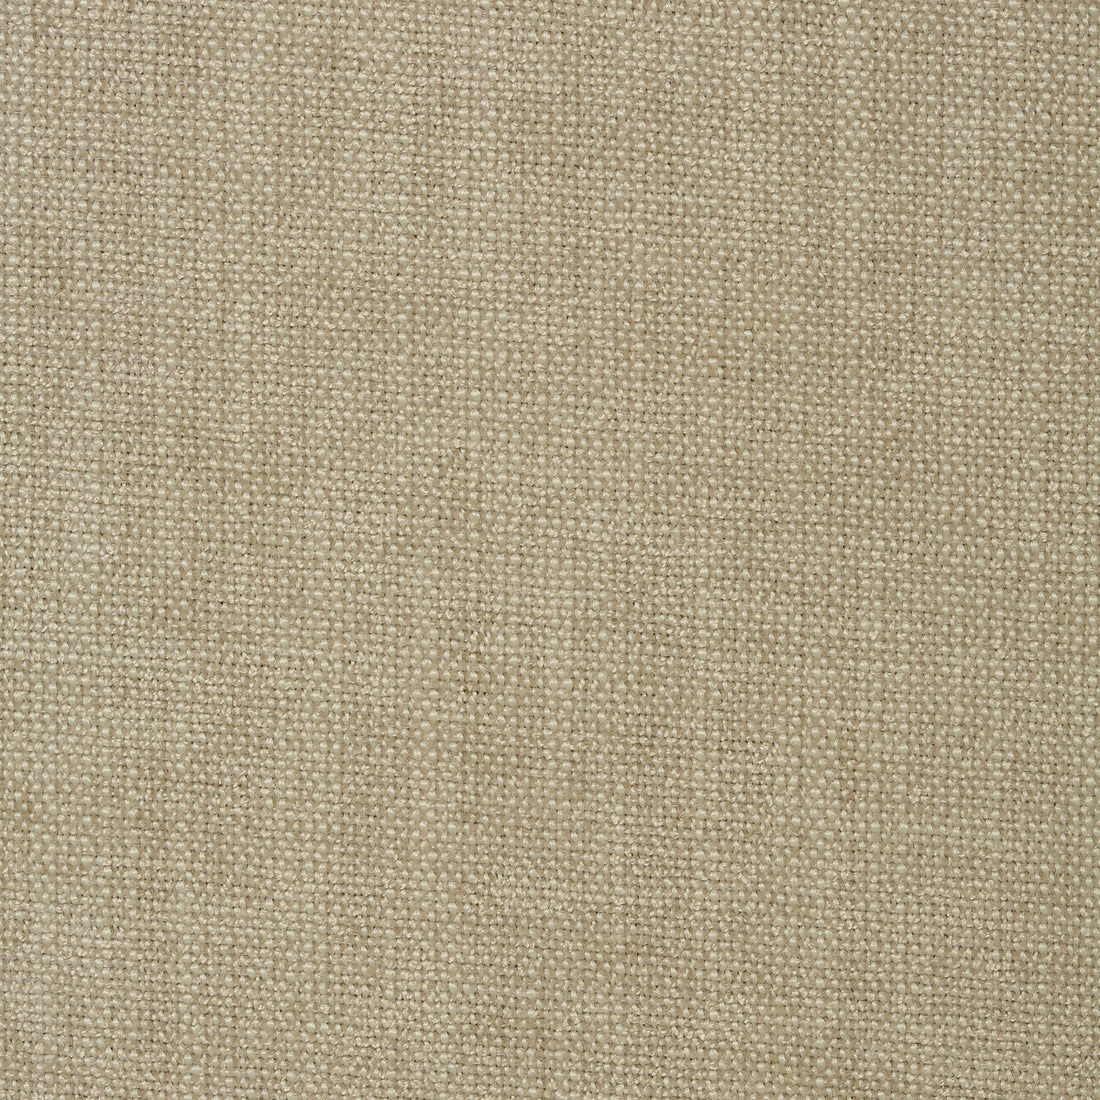 Kravet Contract fabric in 35114-106 color - pattern 35114.106.0 - by Kravet Contract in the Crypton Incase collection